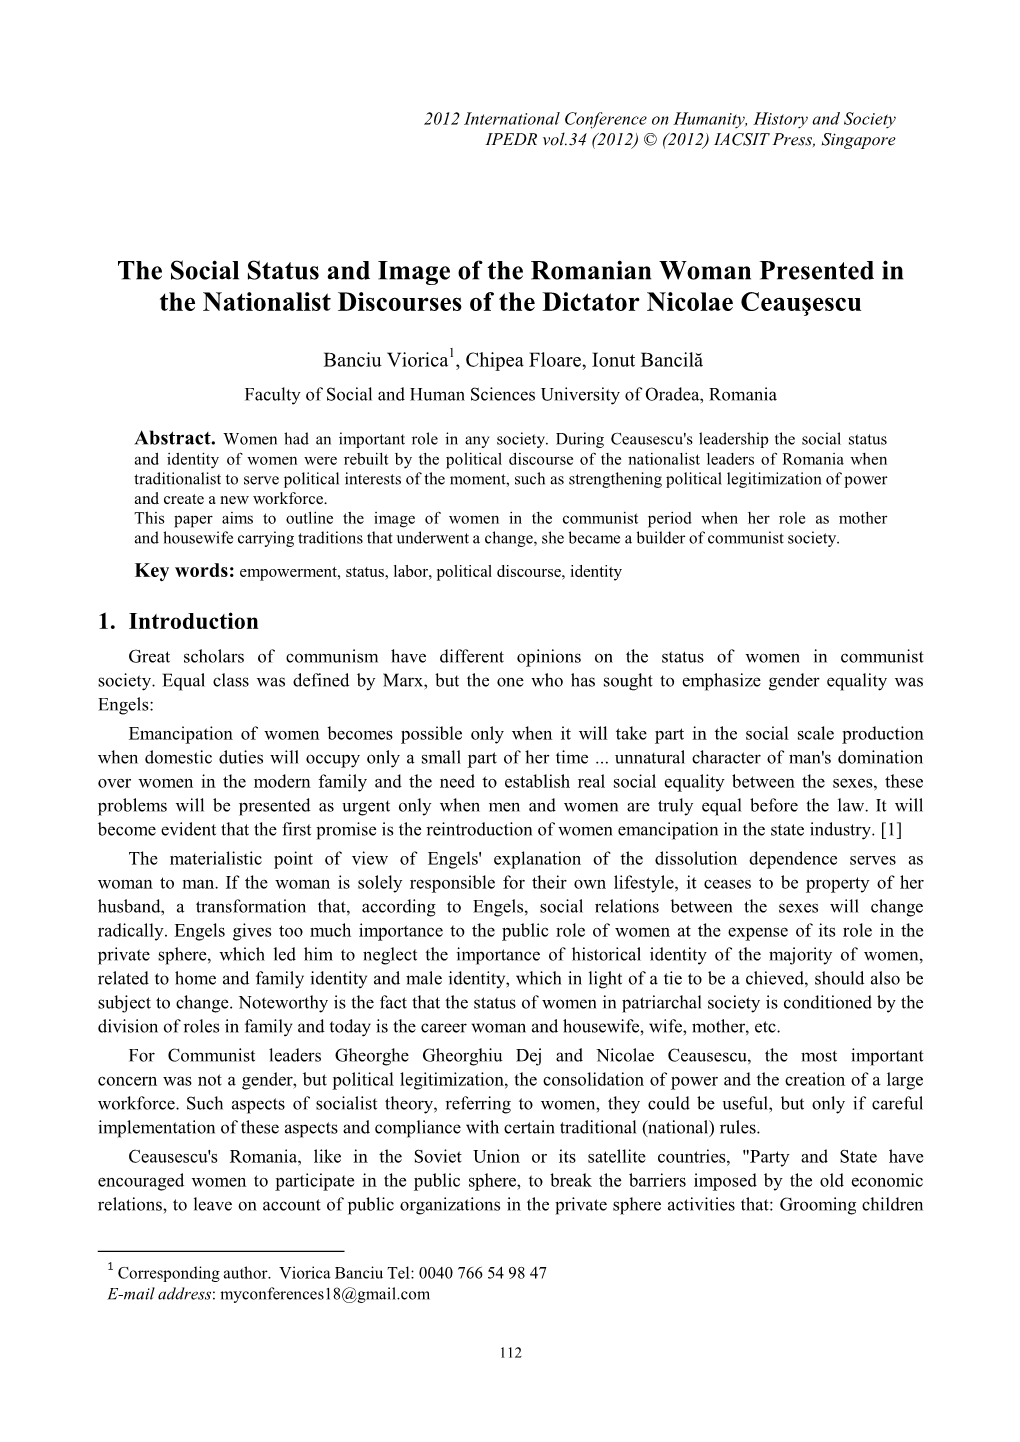 The Social Status and Image of the Romanian Woman Presented in the Nationalist Discourses of the Dictator Nicolae Ceauşescu